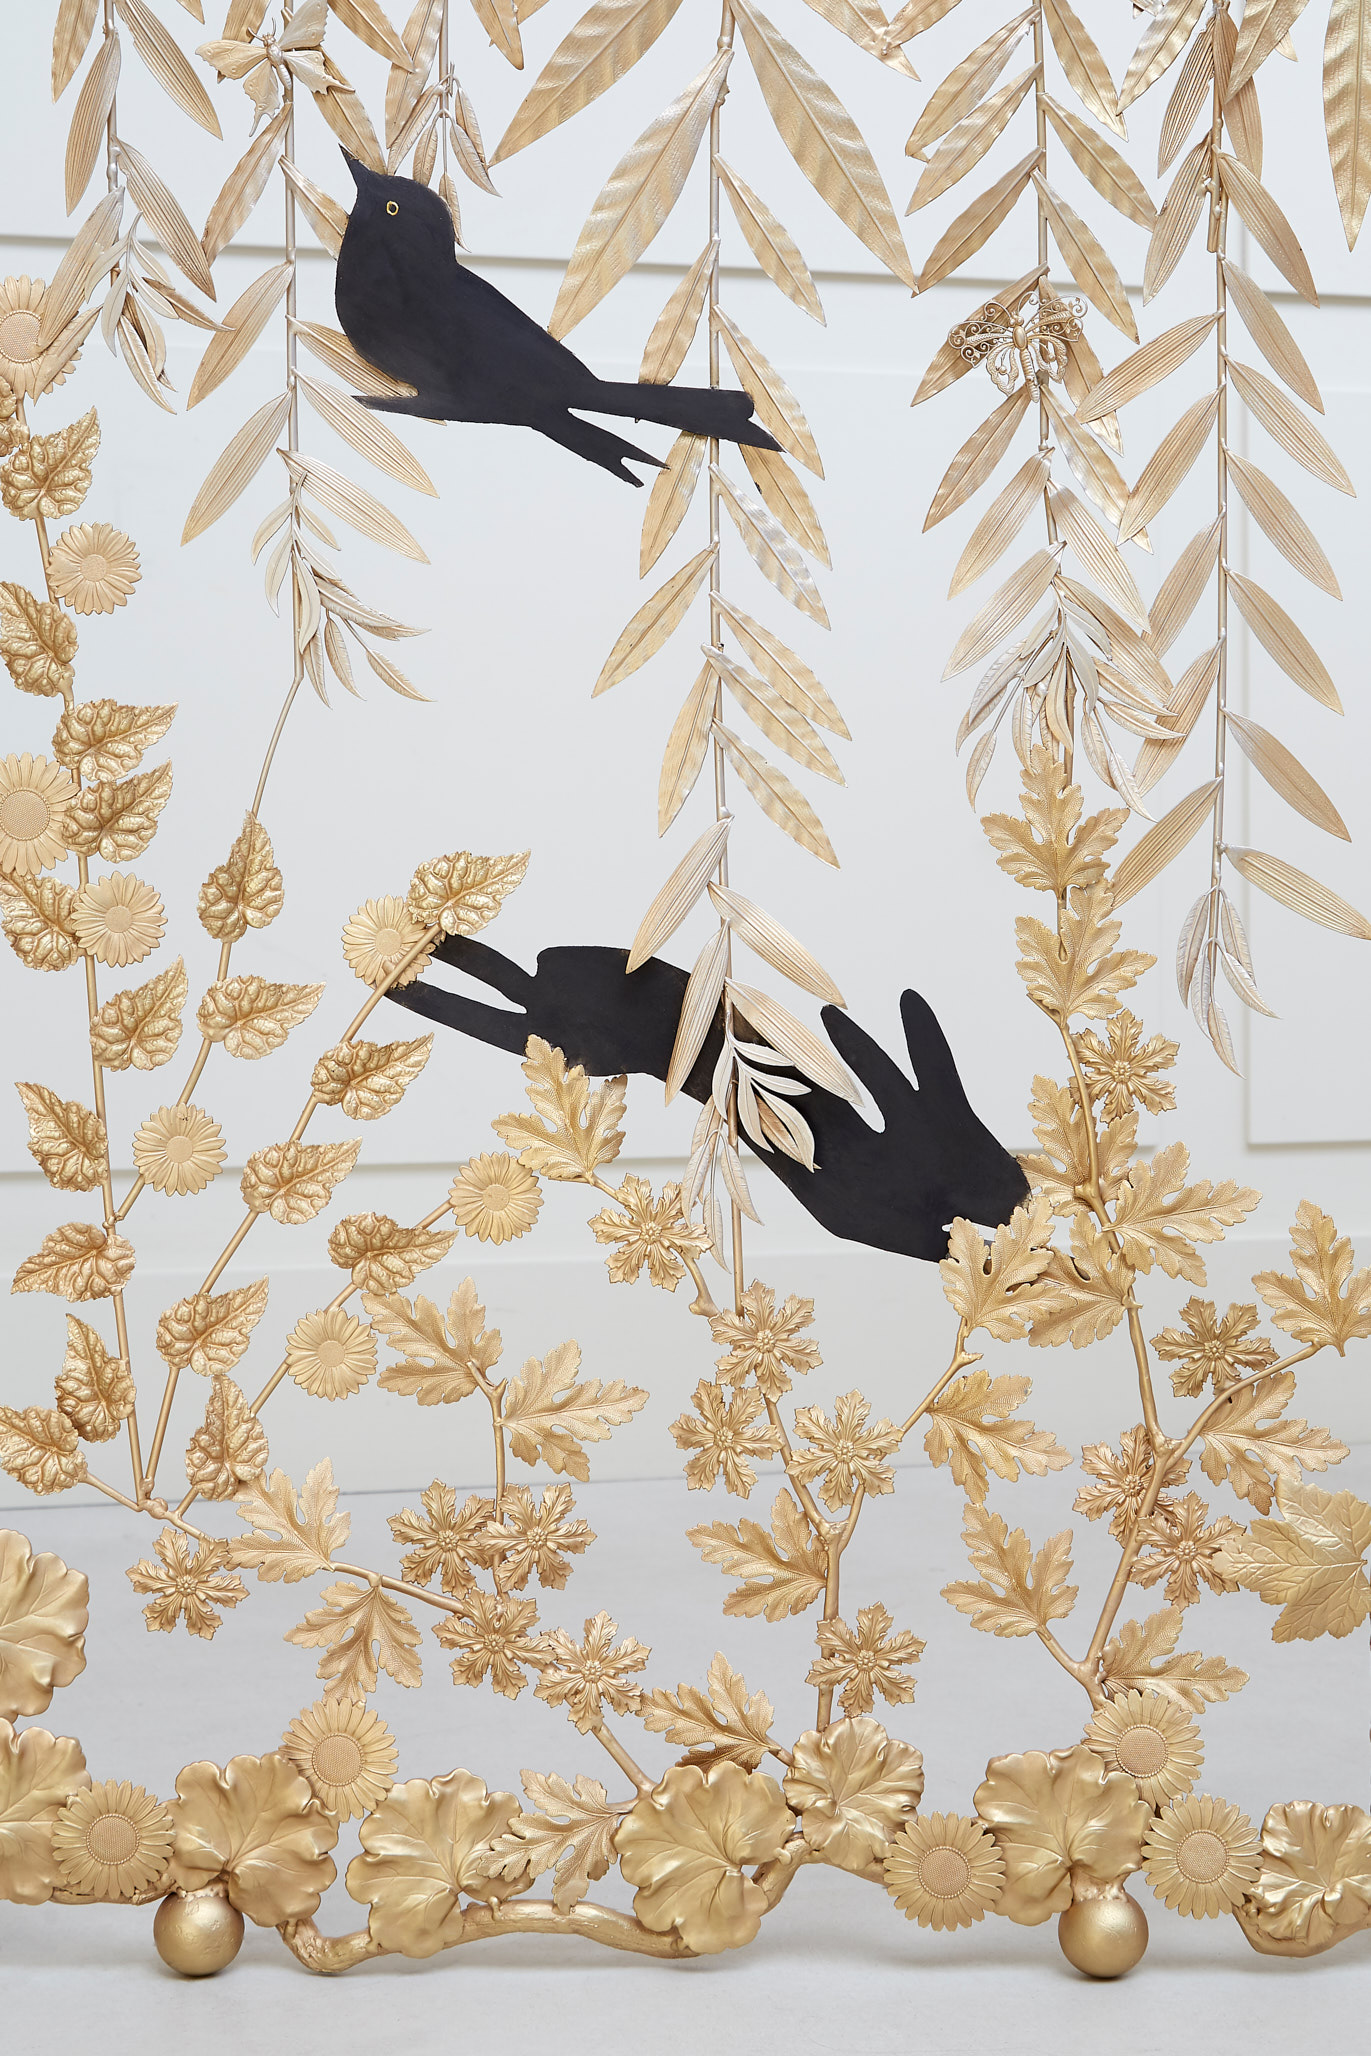 Joy de Rohan Chabot, “The weeping willow, black birds and rabbits”, vue 01